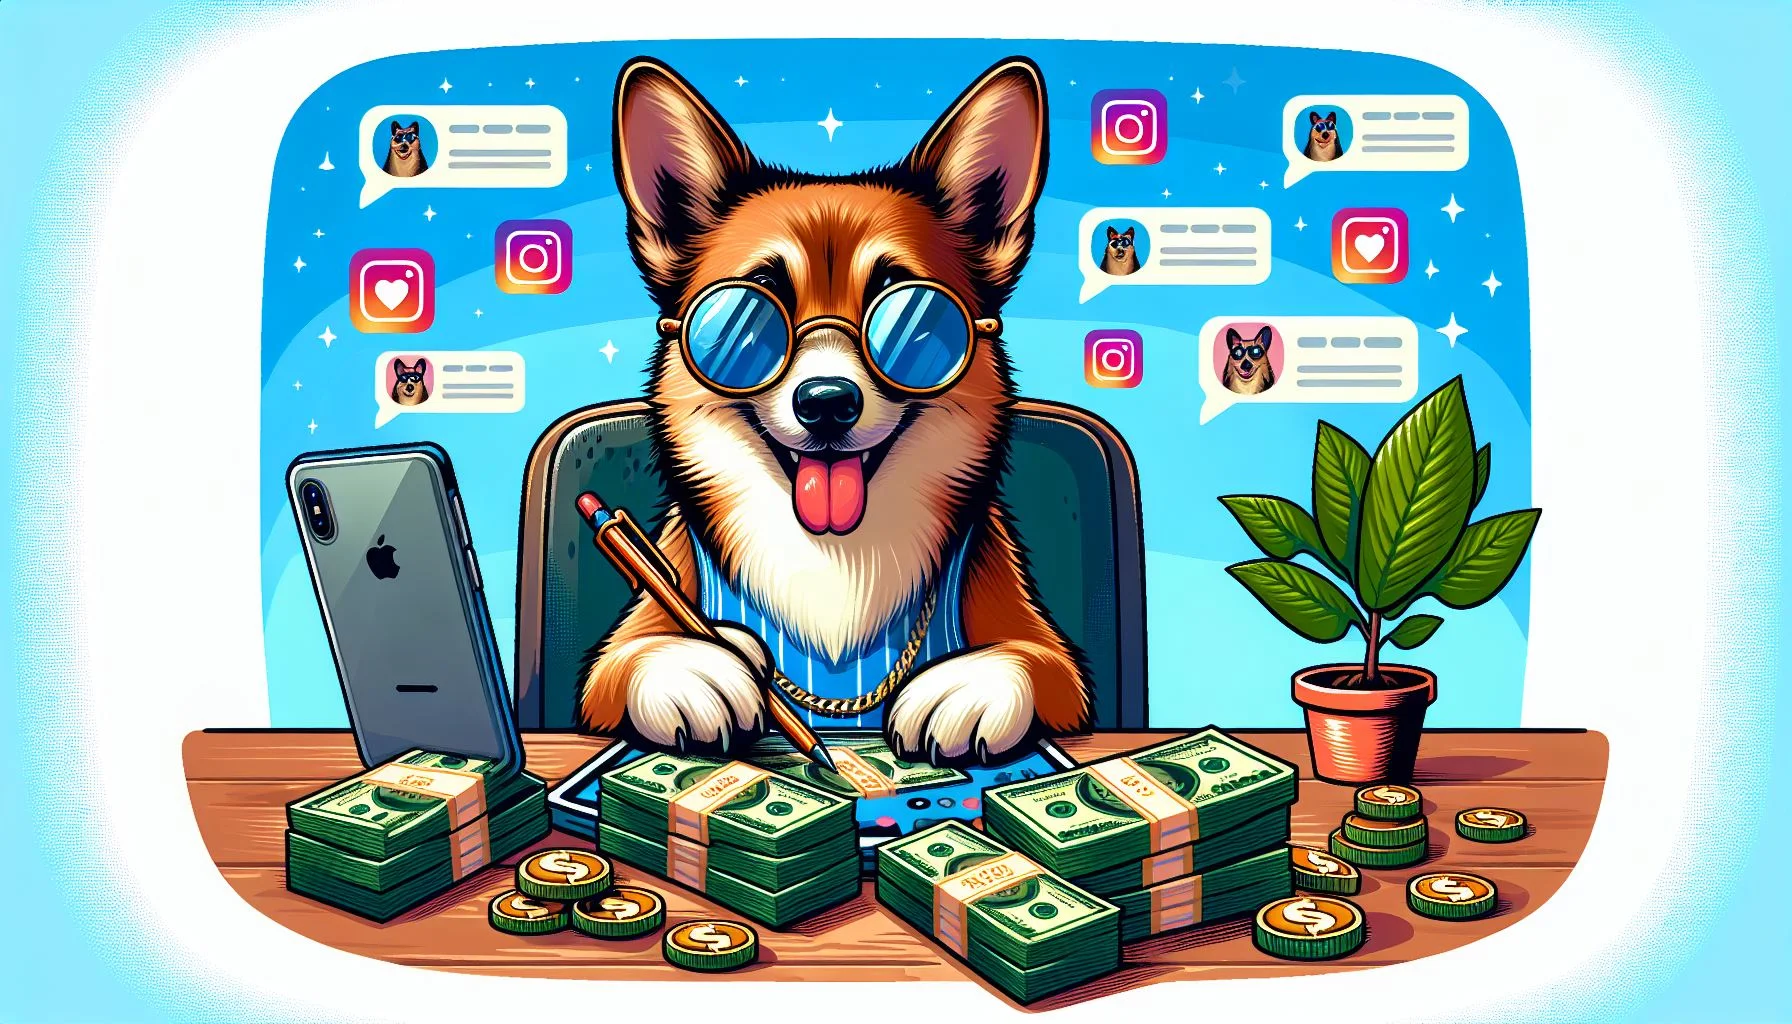 A pet influencer counting money